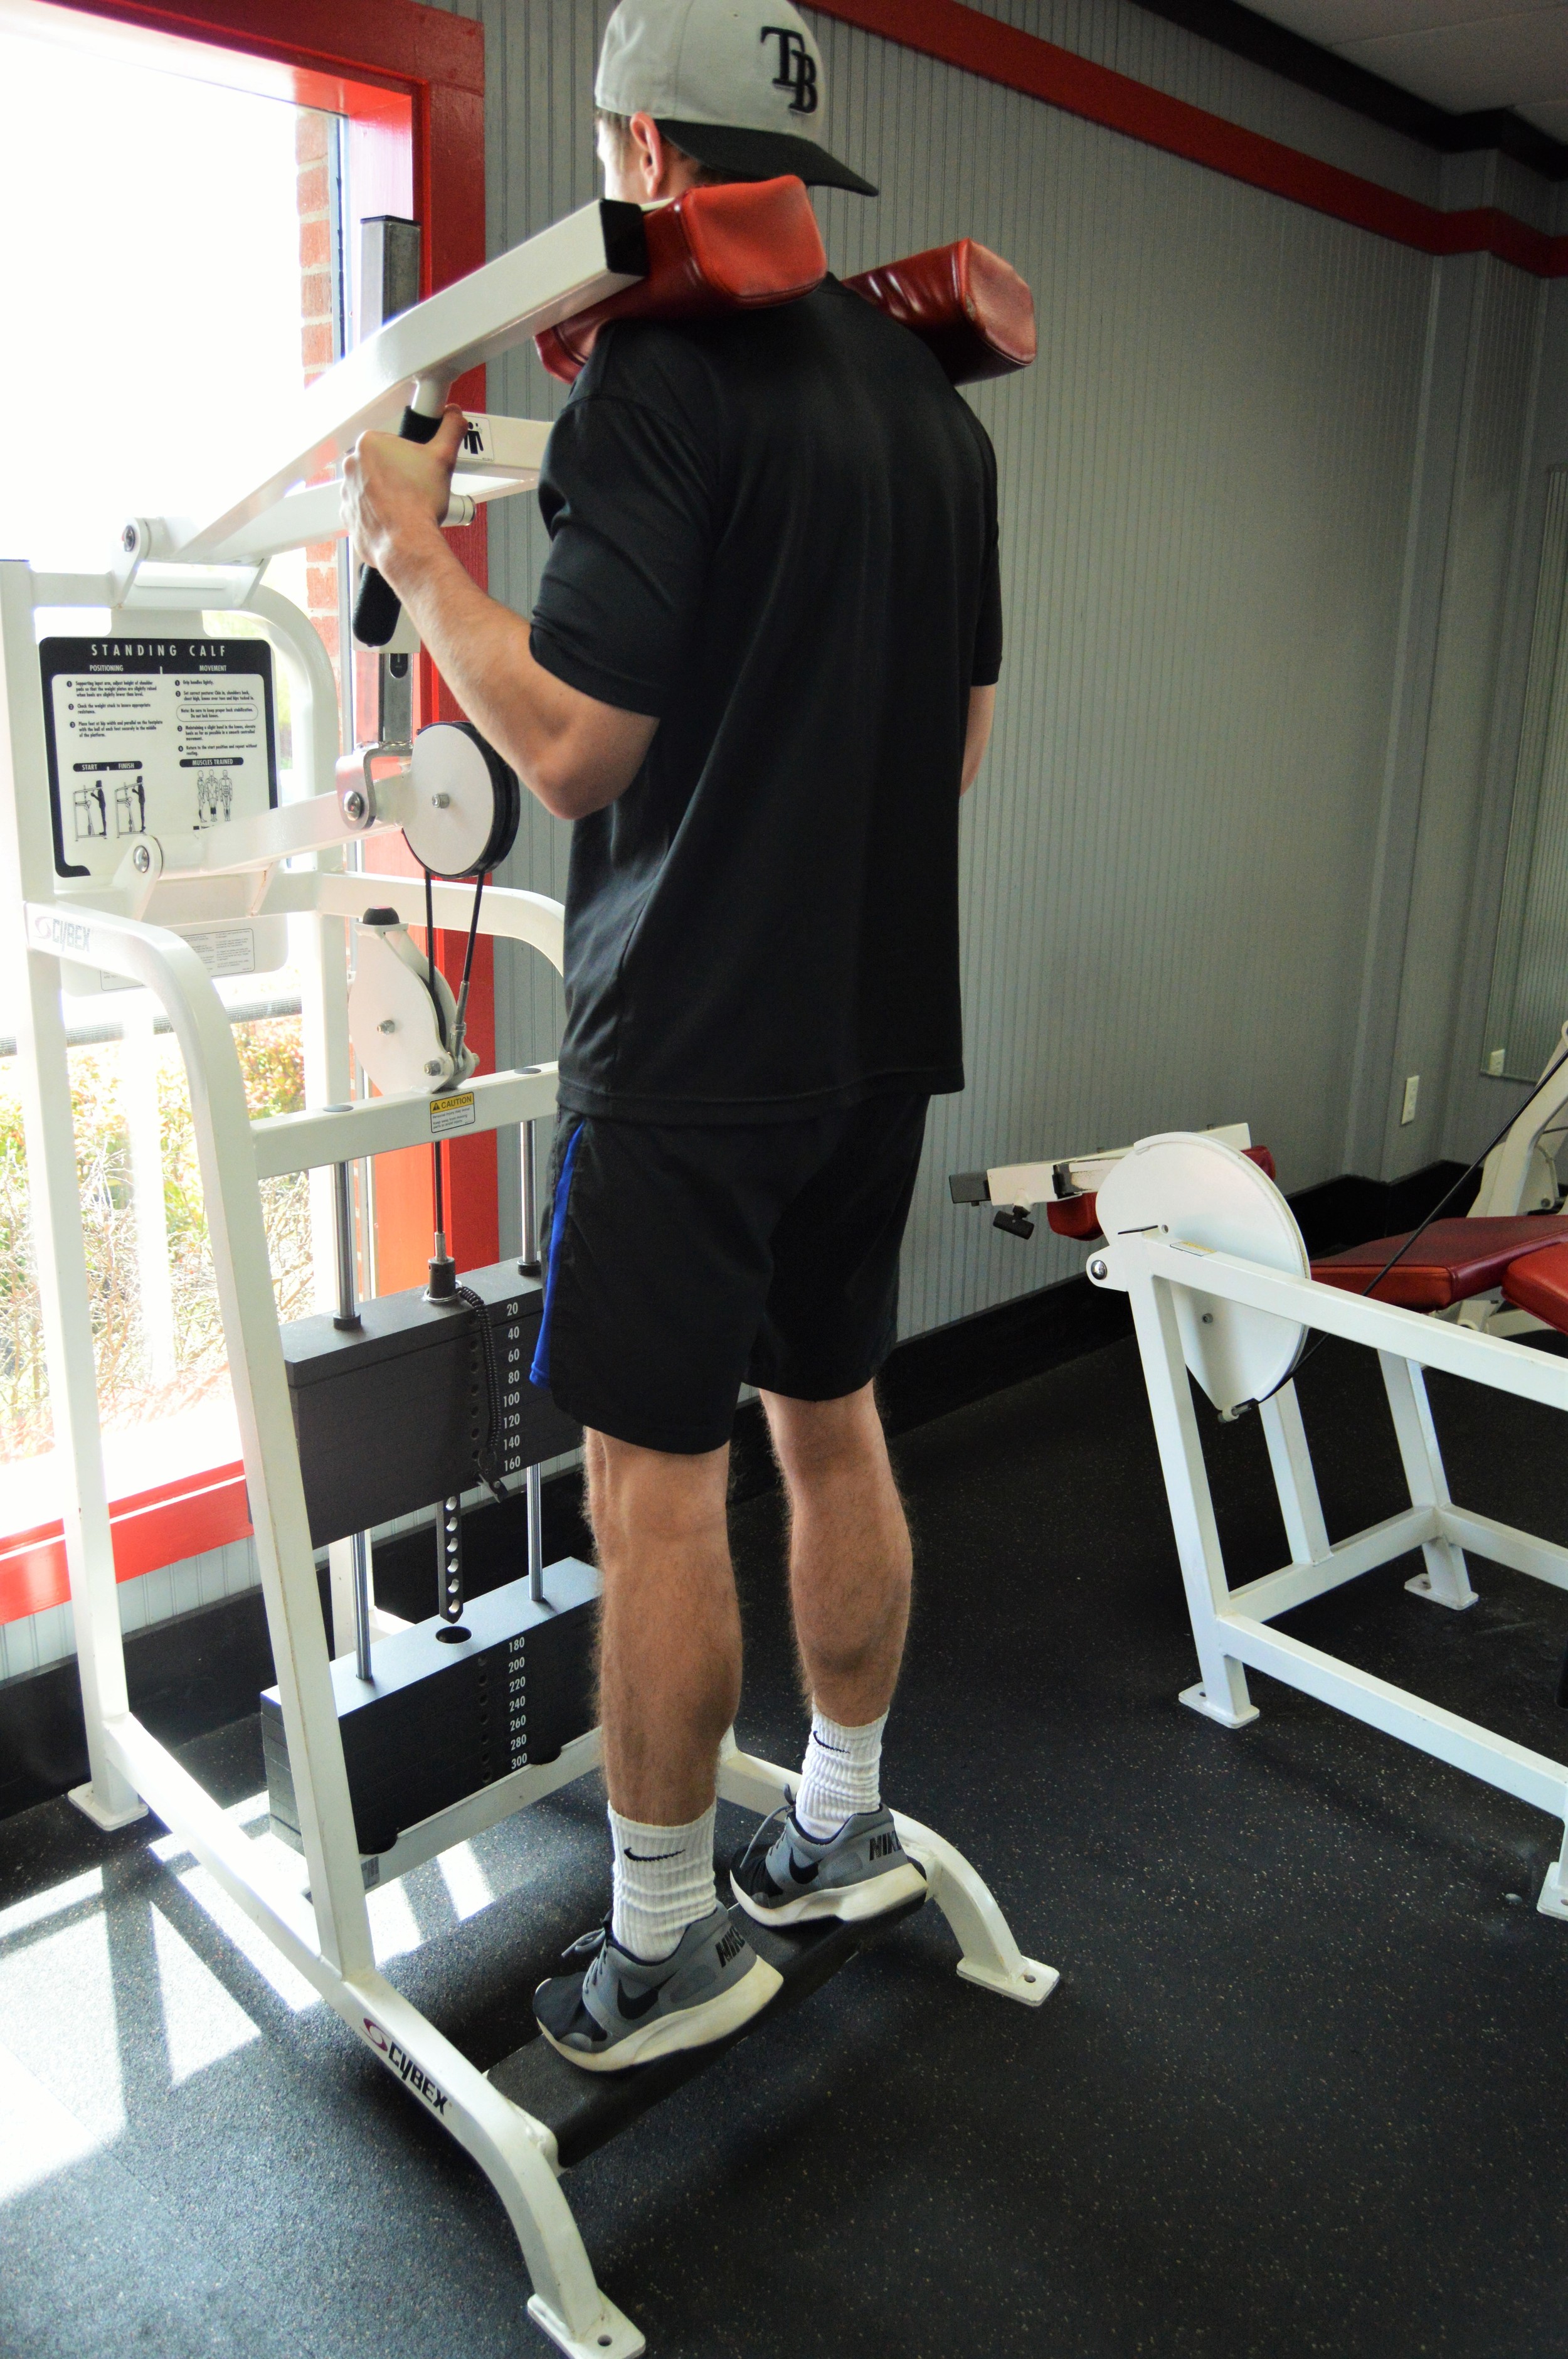 The standing calf machine works your calf muscles. Try completing three sets of 15 reps to keep those legs looking great!&nbsp;